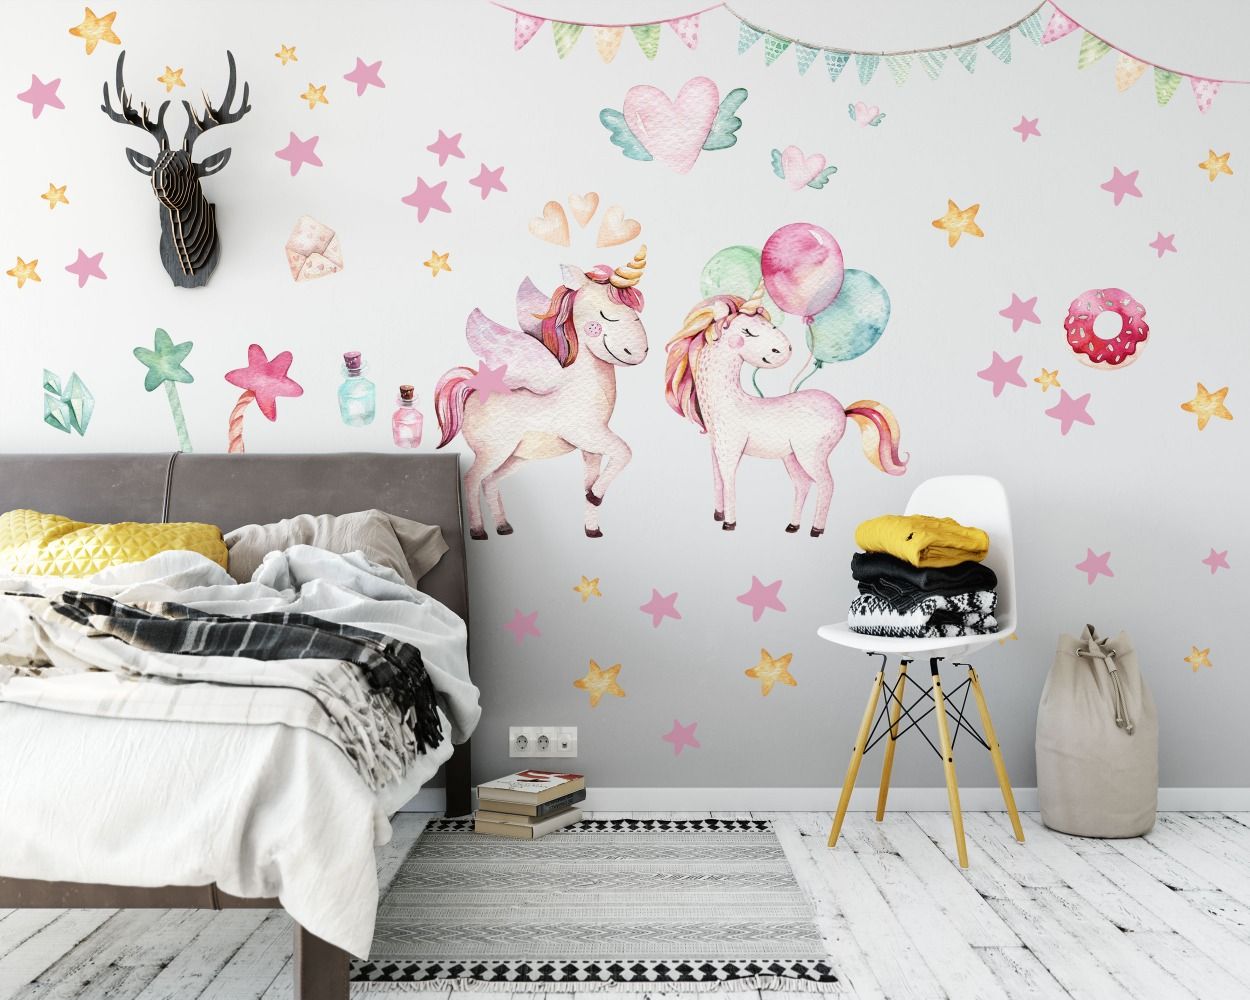 Beautiful Unicorn With Star And Moon Vinyl Wall Decals For Kids' Room wall decor